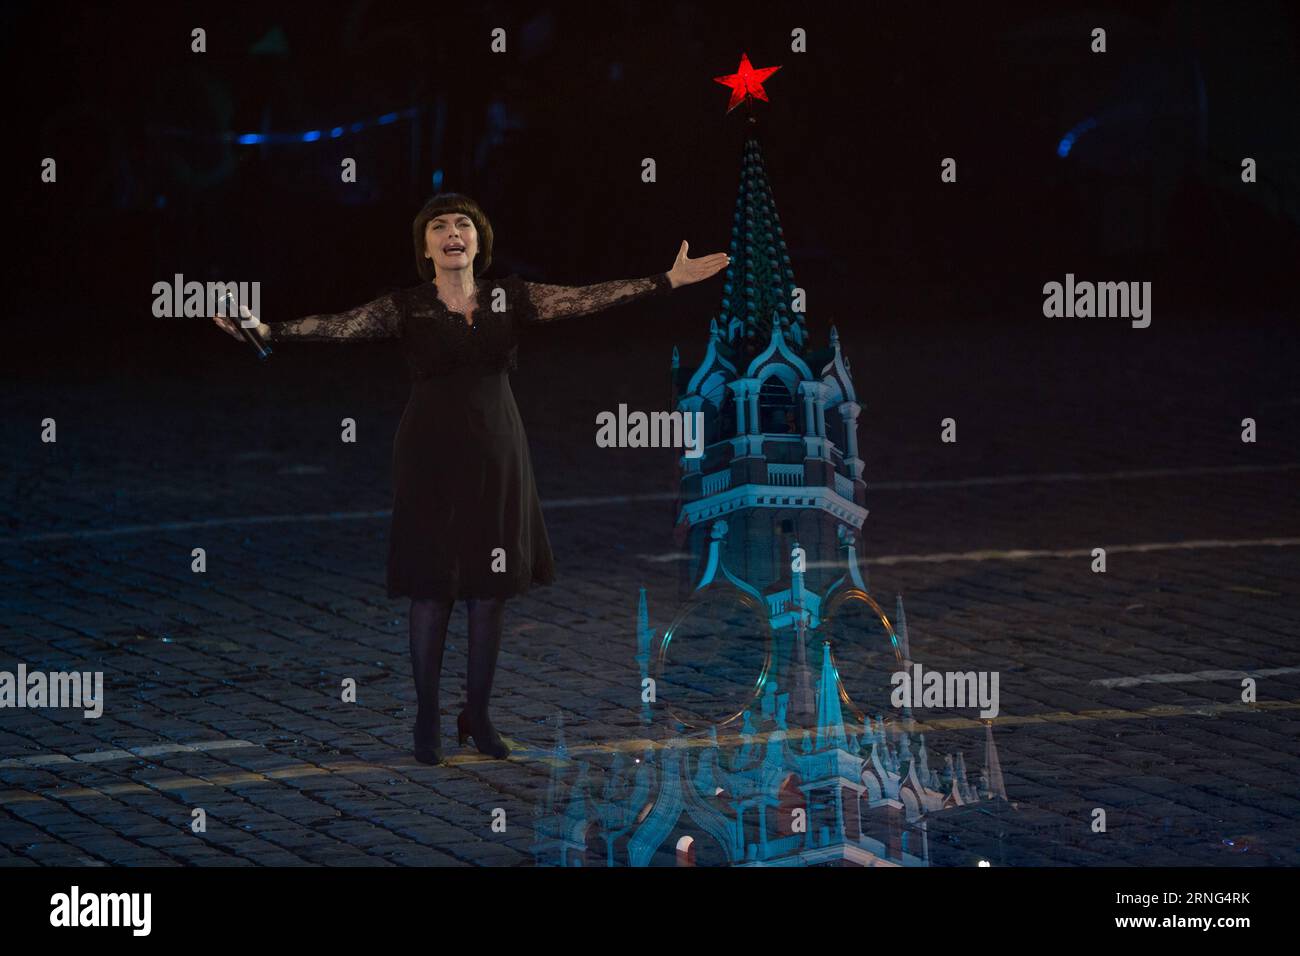 (160905) -- MOSCOW, Sept. 5, 2016 -- French singer Mireille Mathieu performs during the Spasskaya tower Military music festival held in Moscow, capital of Russia, Sept. 4, 2016. The festival closed on Sunday.Bai Xueqi) (yy) RUSSIA-MOSCOW-MILITARY MUSIC FESTIVAL-CLOSURE baoxxueqi PUBLICATIONxNOTxINxCHN   160905 Moscow Sept 5 2016 French Singer Mireille Mathieu performs during The Fun Kaya Tower Military Music Festival Hero in Moscow Capital of Russia Sept 4 2016 The Festival Closed ON Sunday Bai Xueqi yy Russia Moscow Military Music Festival Closure  PUBLICATIONxNOTxINxCHN Stock Photo